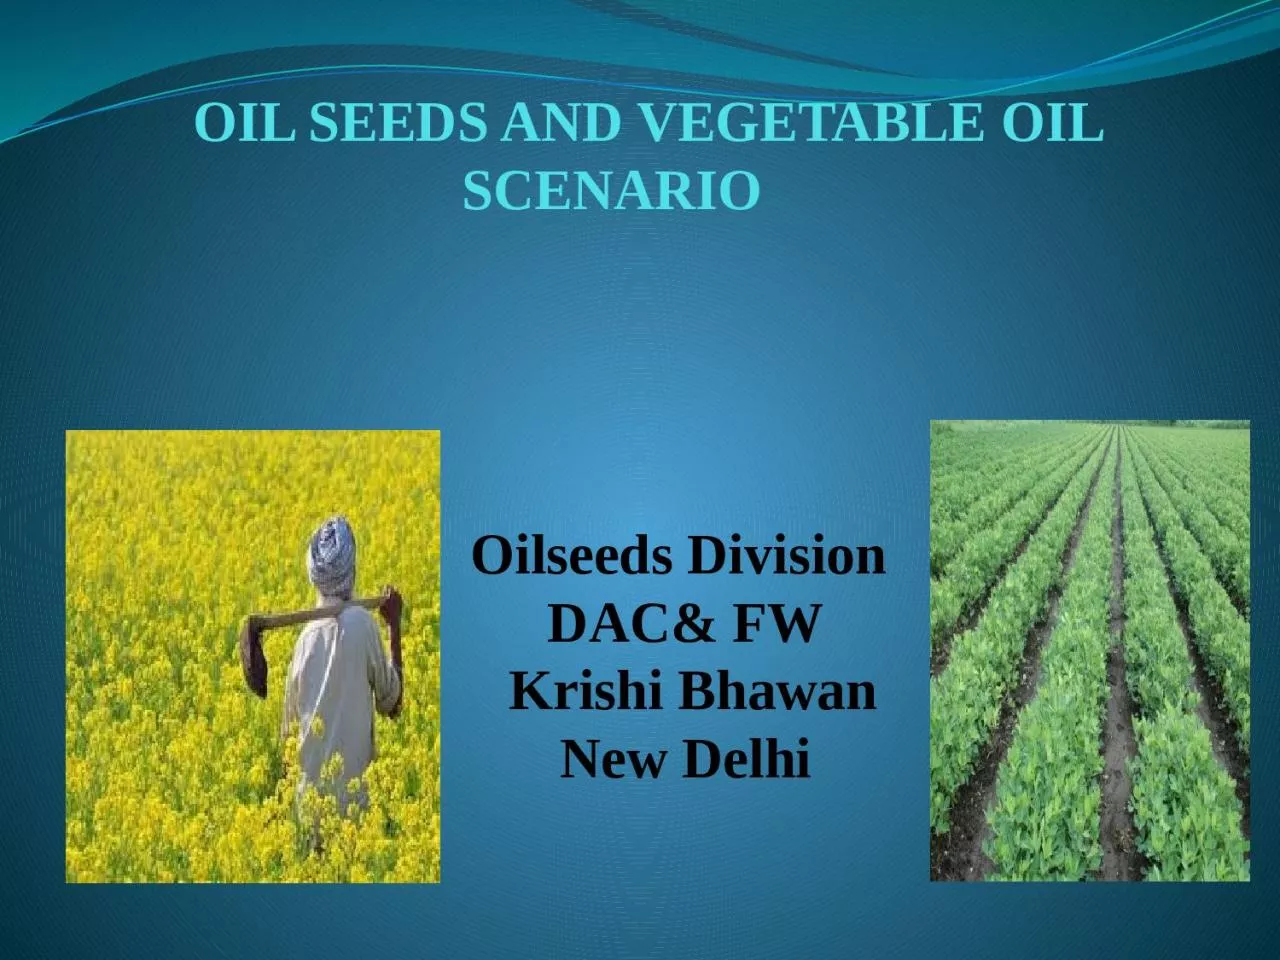 OIL SEEDS AND VEGETABLE OIL SCENARIO